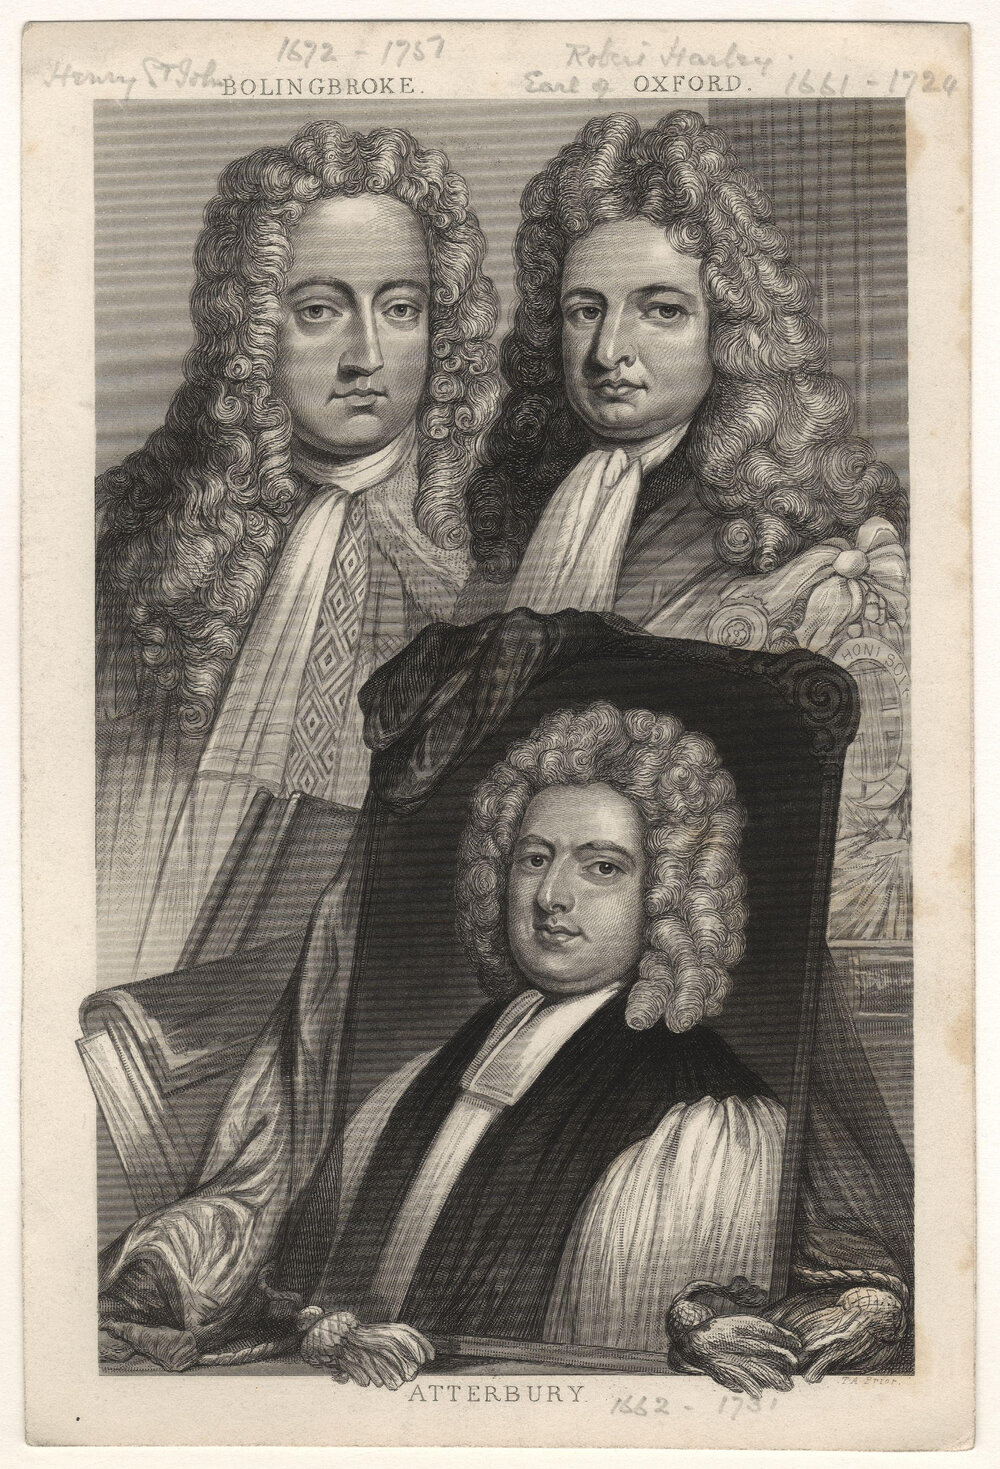 Robert Harley (top right) with Henry St John and Bolingbroke